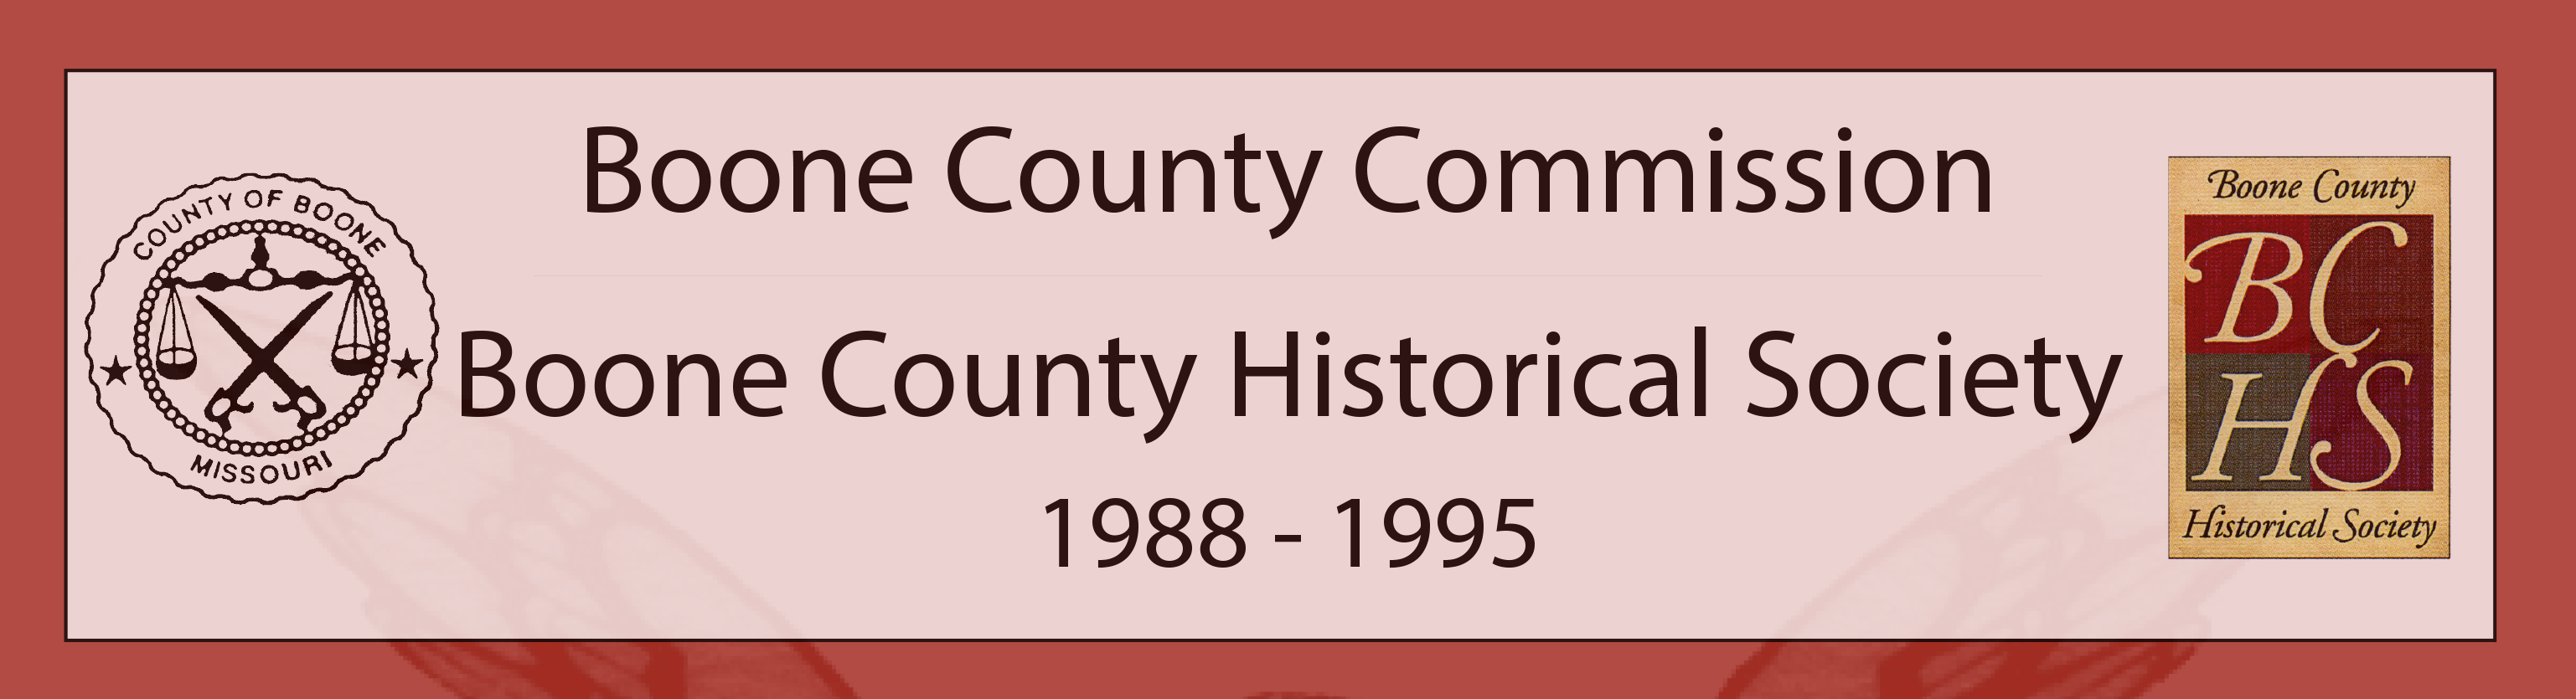 Boone County Commission and Boone County Historical Society years 1988-1995